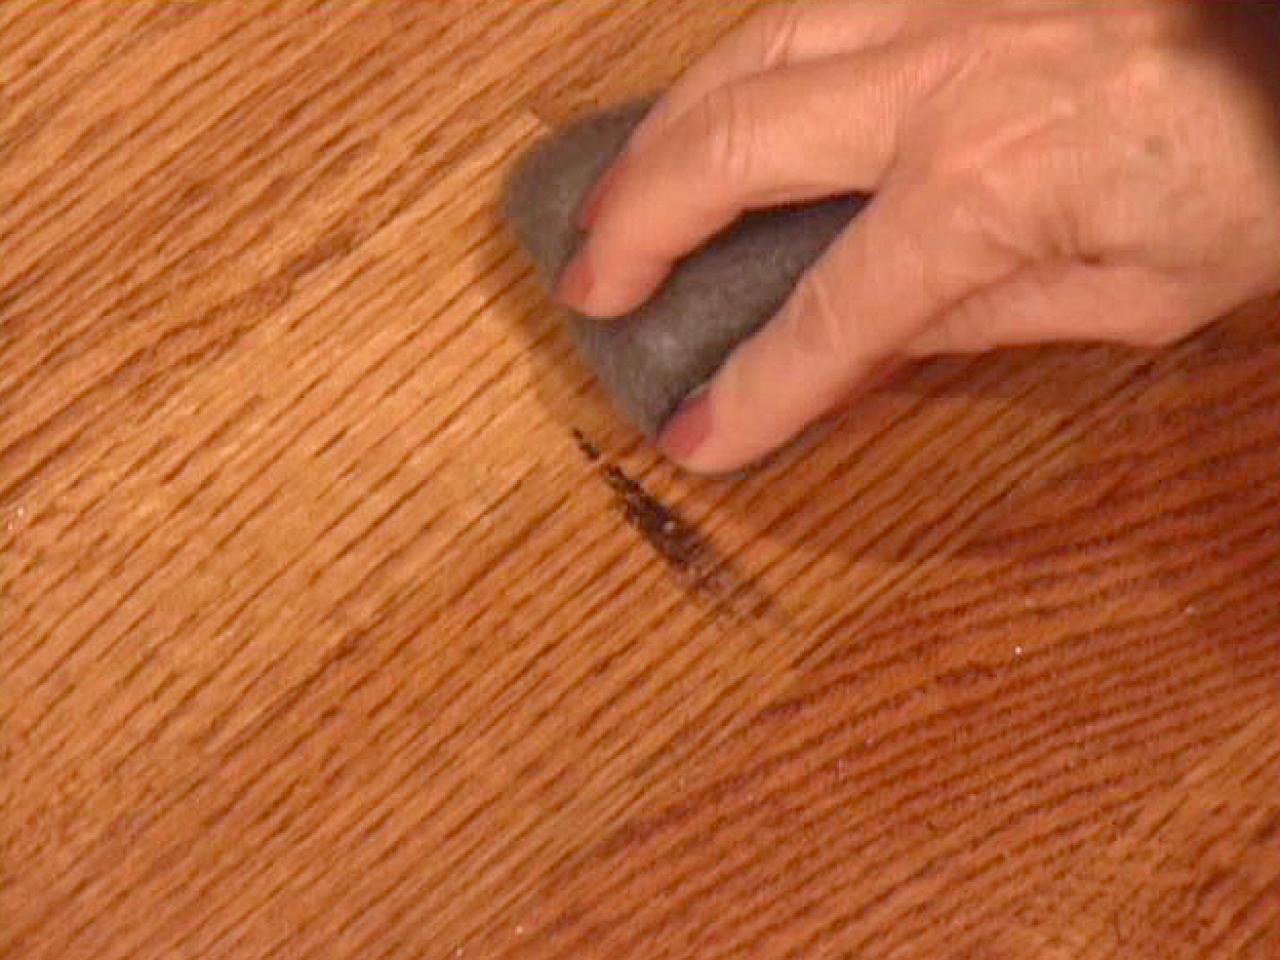 How To Touch Up Wood Floors Tos Diy, How To Clean Hardwood Floors That Have Been Waxed